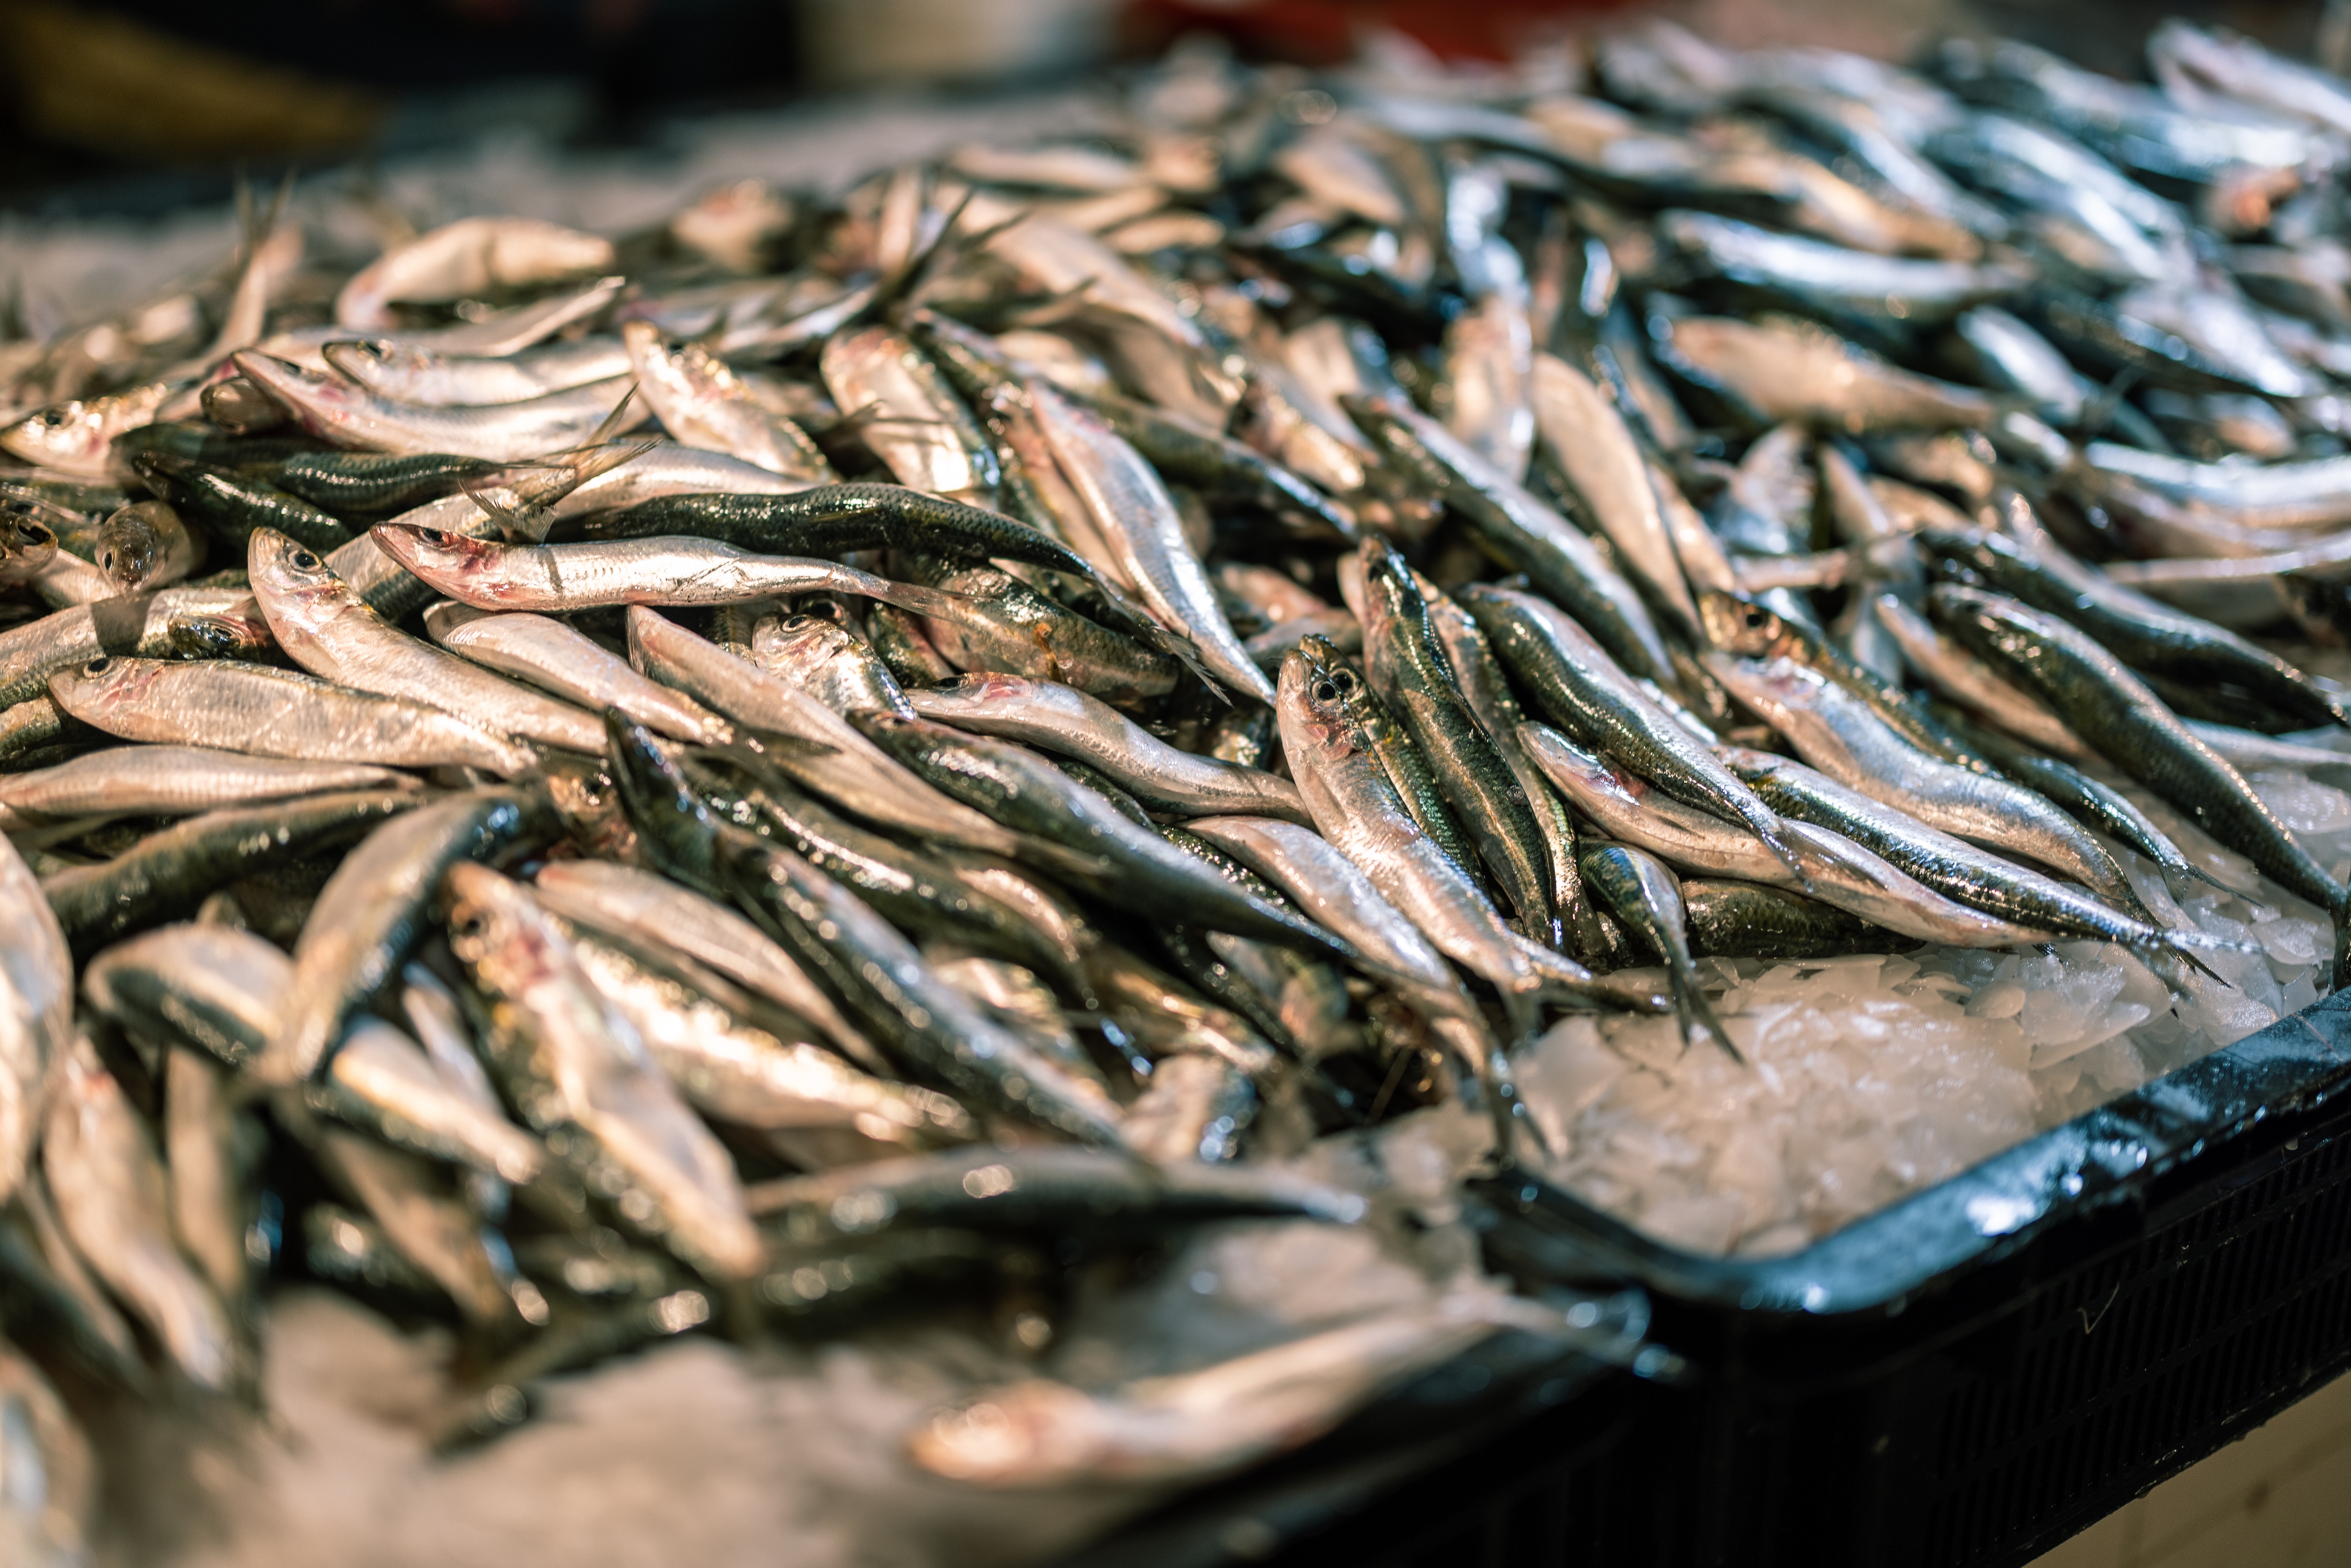 EU committee votes in favour of increased fisheries regulation: Press comment